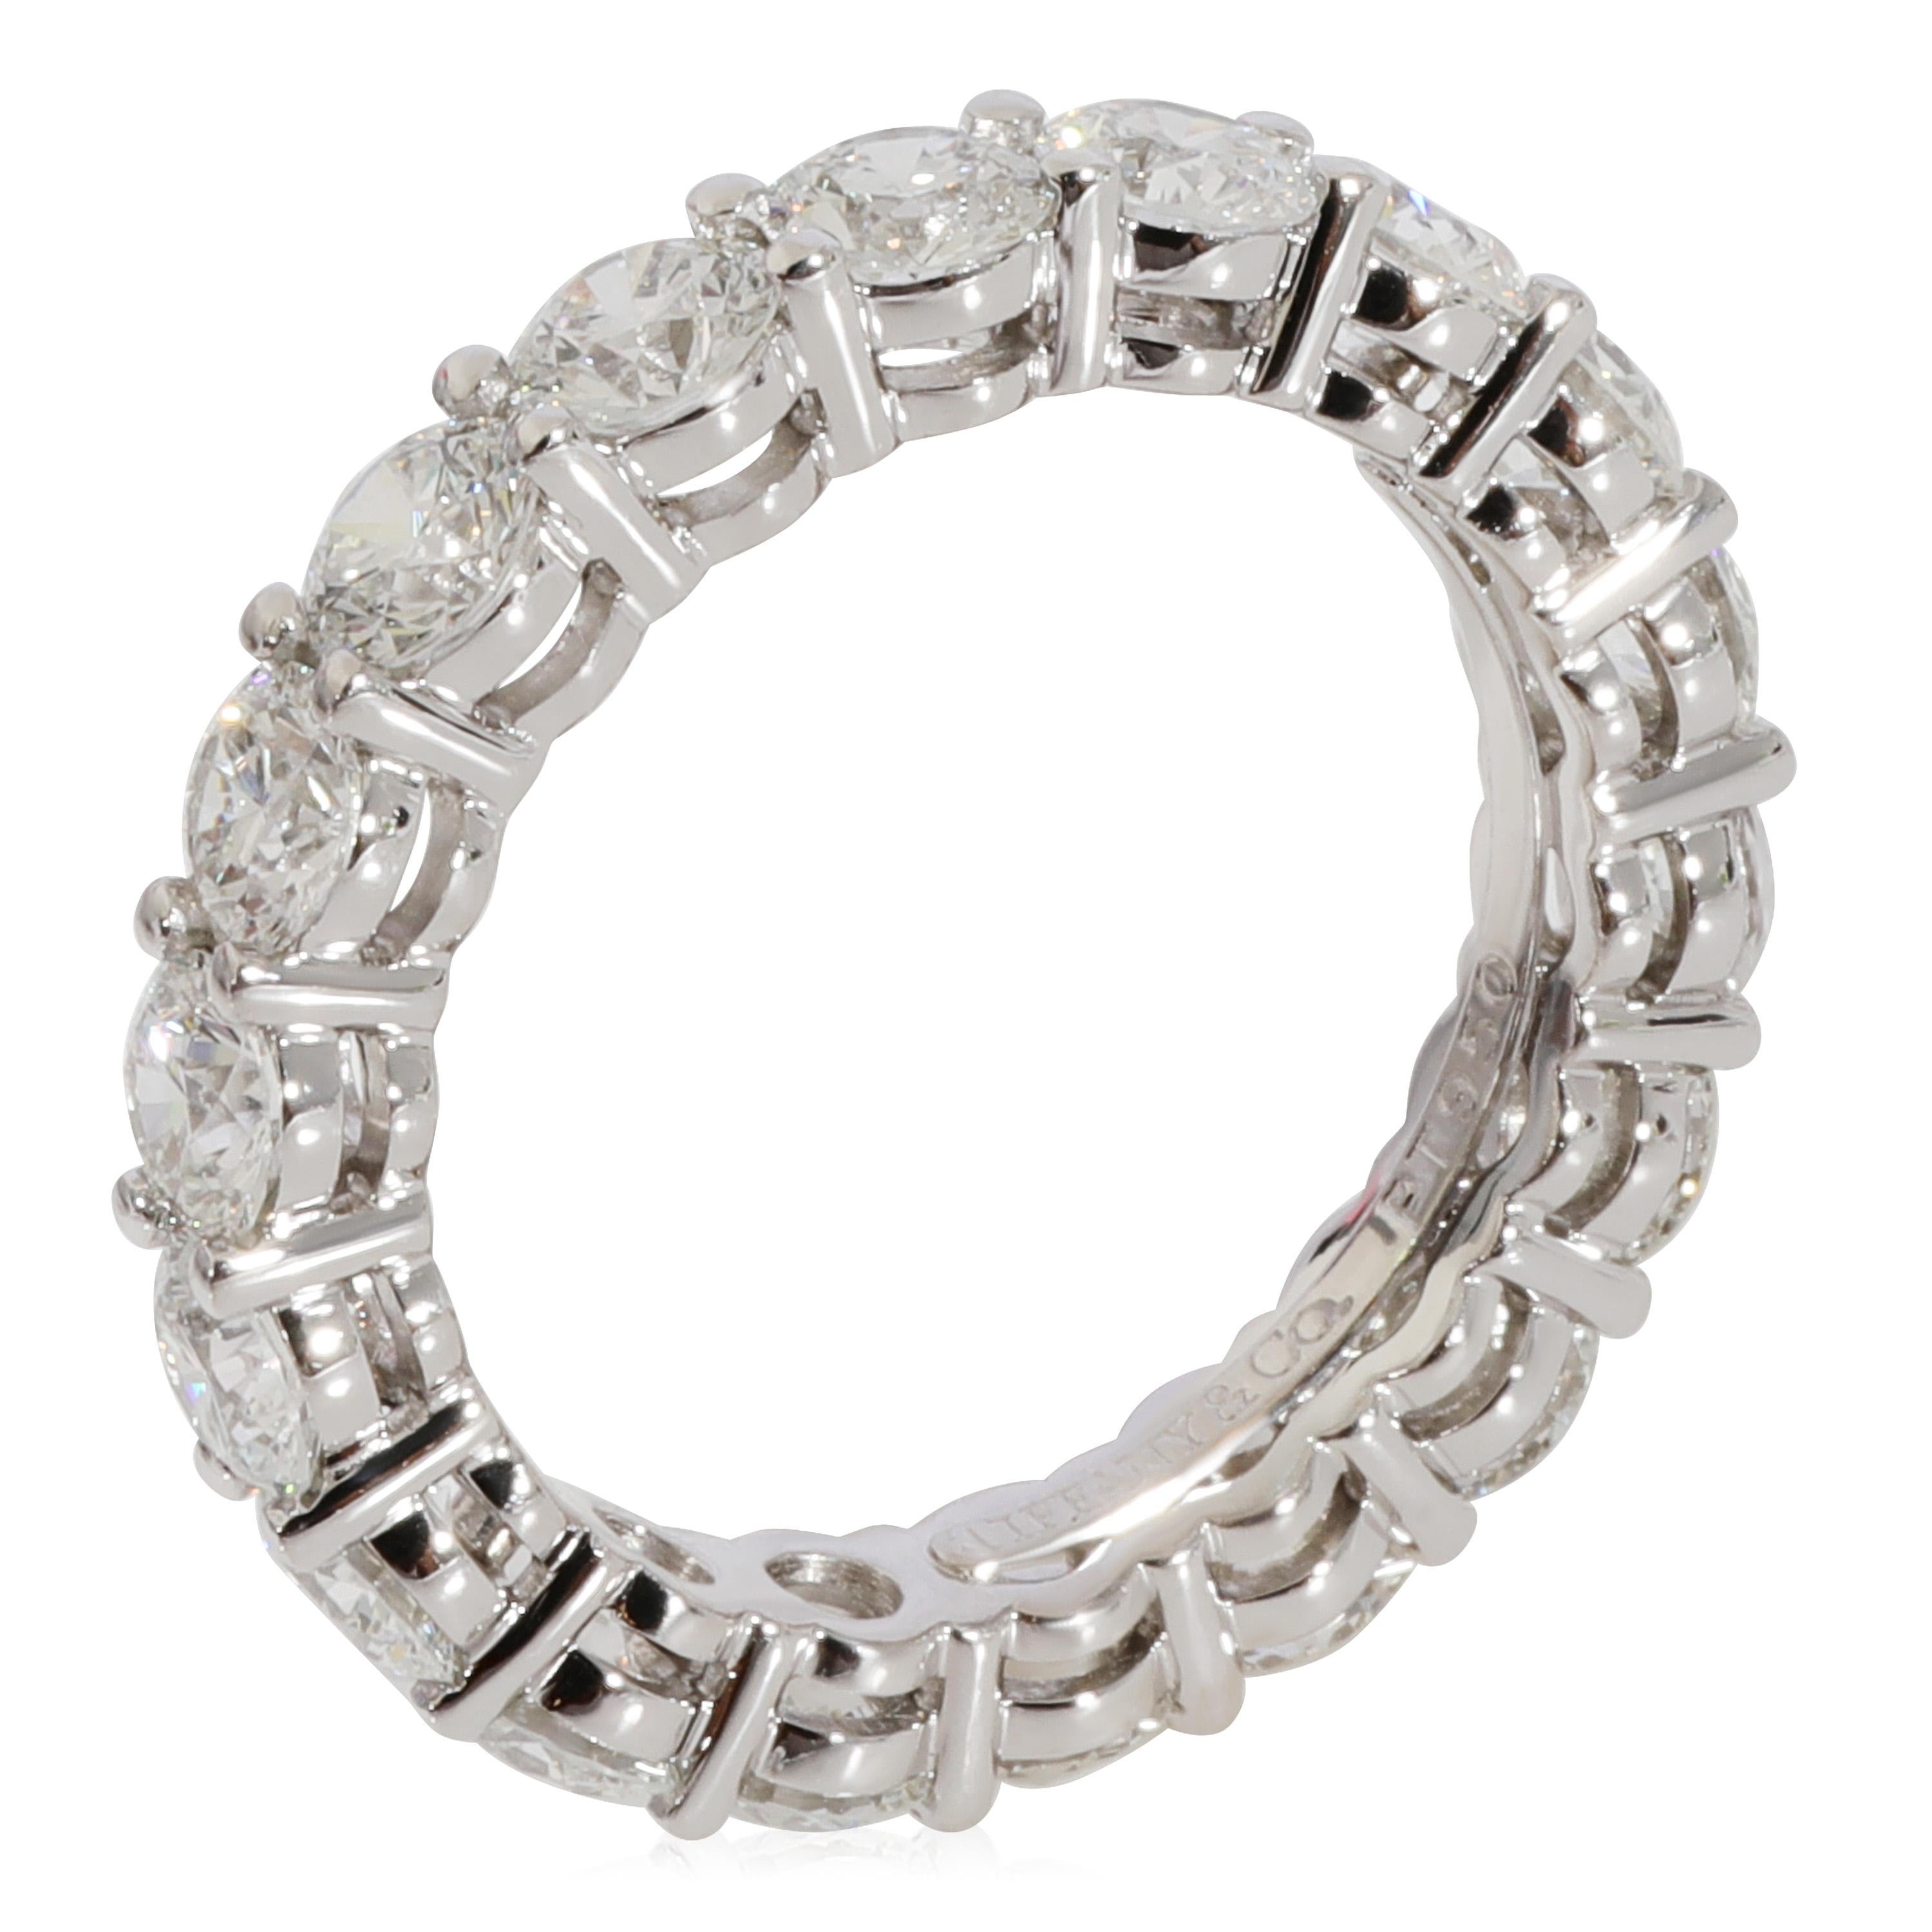 Tiffany & Co. Embrace Diamond Eternity Band in Platinum 2.86 CTW

PRIMARY DETAILS
SKU: 124976
Listing Title: Tiffany & Co. Embrace Diamond Eternity Band in Platinum 2.86 CTW
Condition Description: Retails for 19000 USD. In excellent condition and